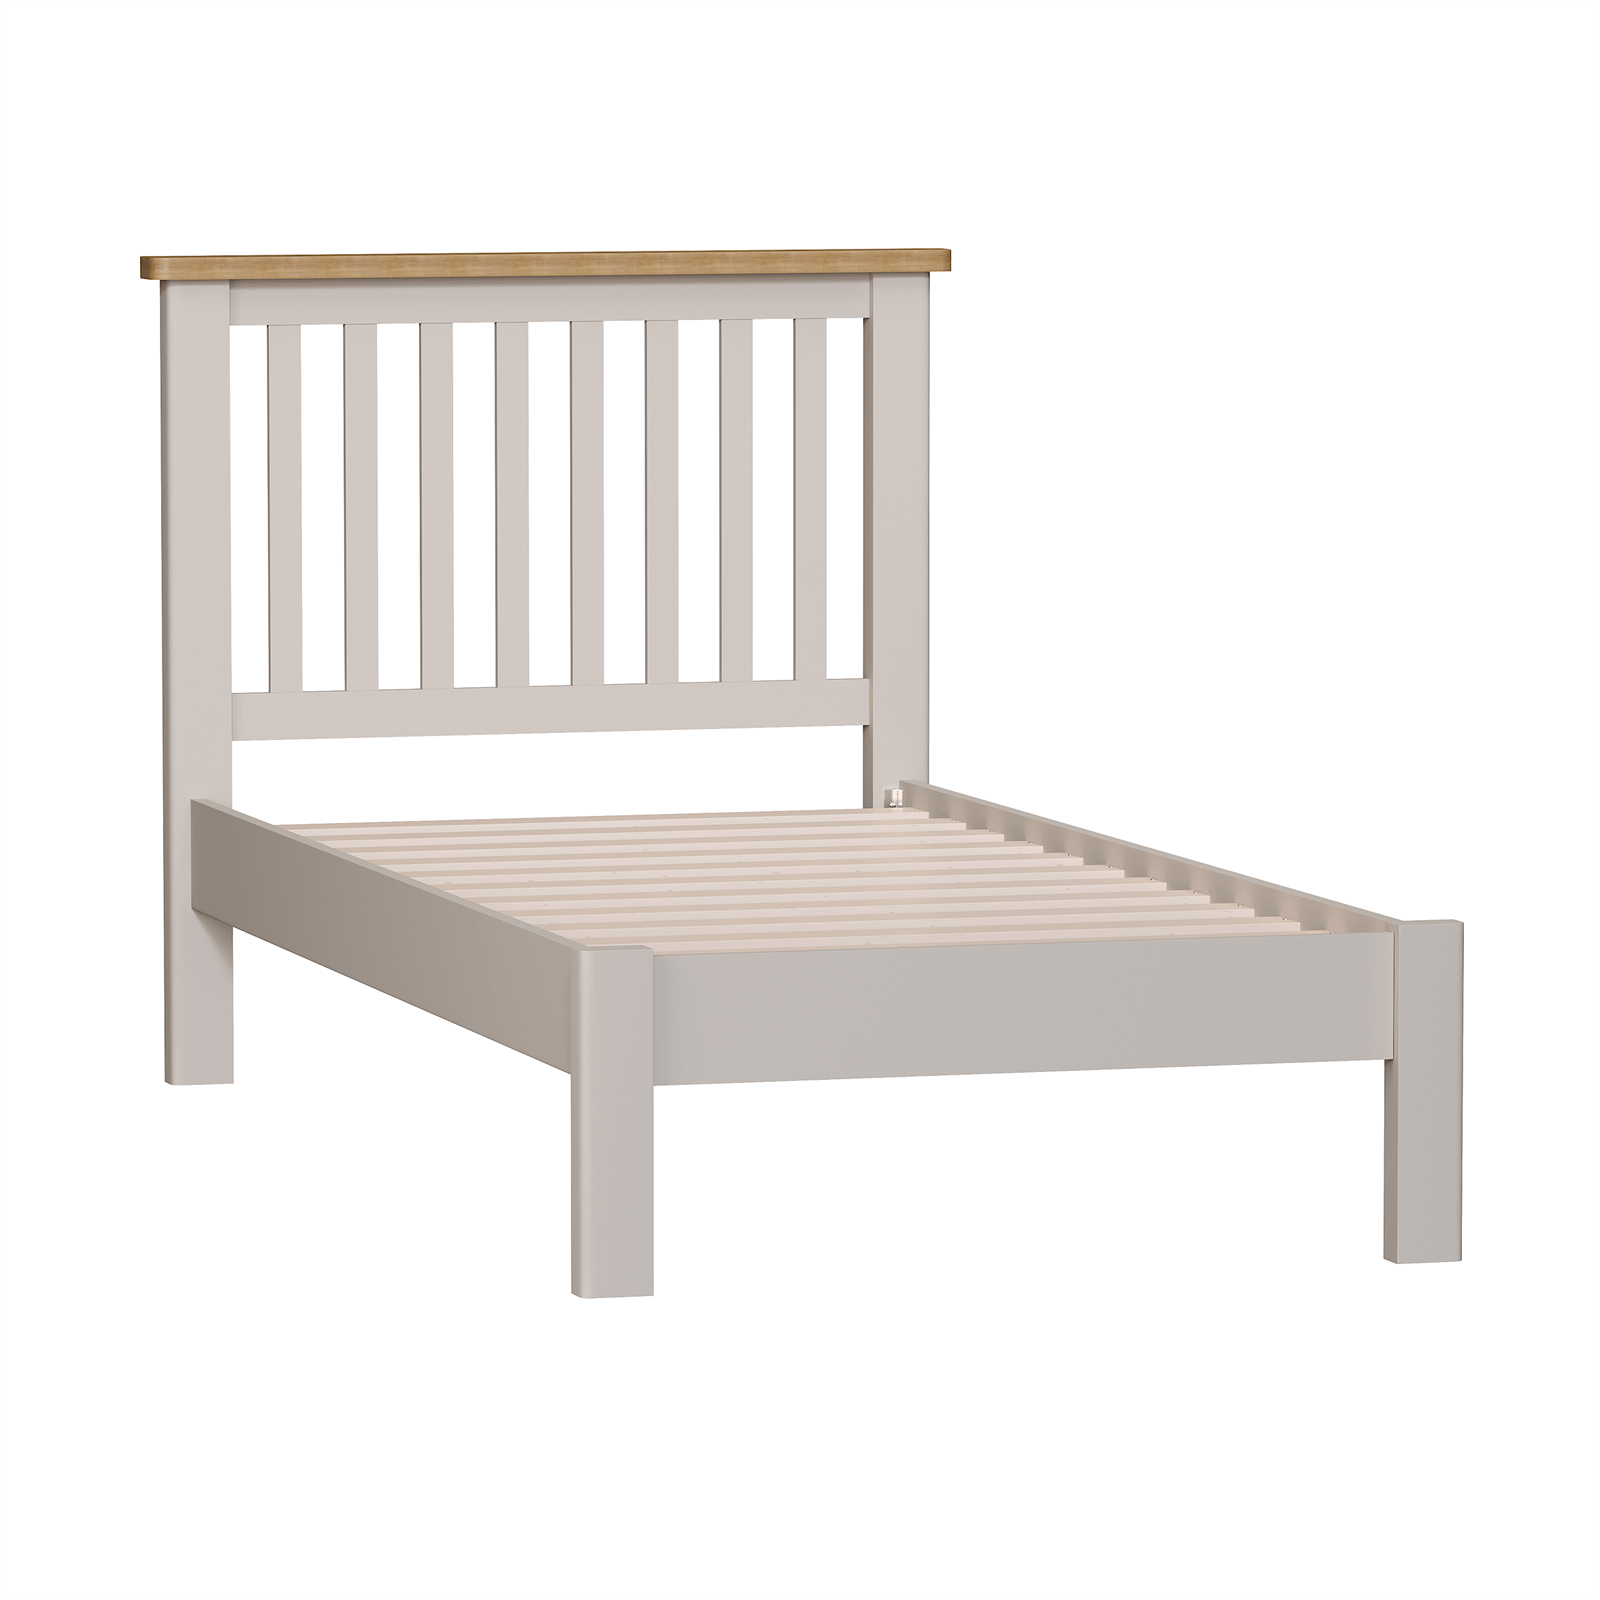 Padstow Single Bed Frame - Truffle